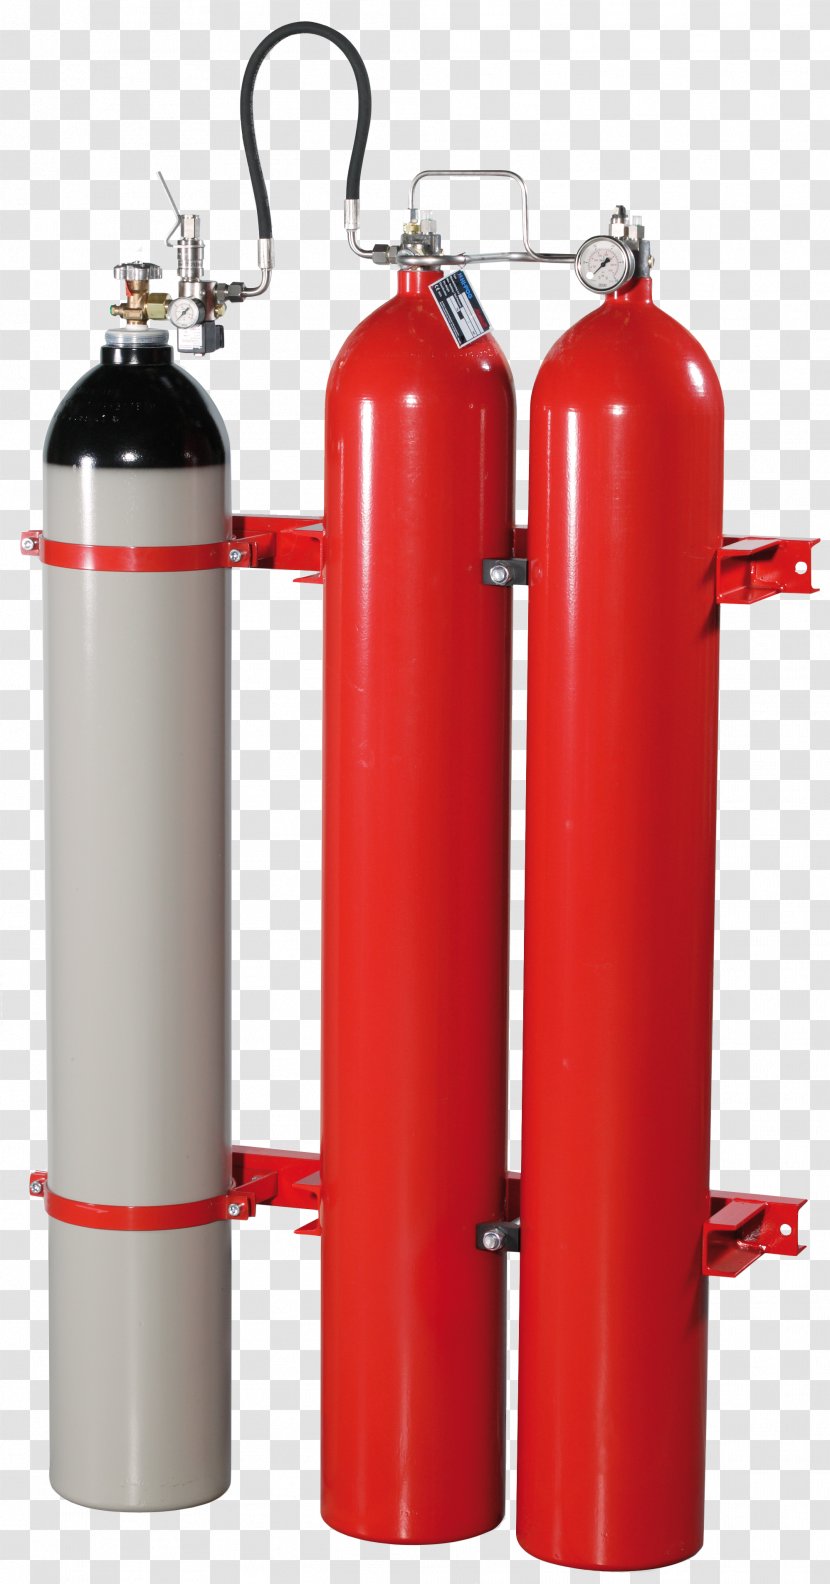 Fog Water System Pressure Air - Cylinder - Fire Extinguisher Material Transparent PNG